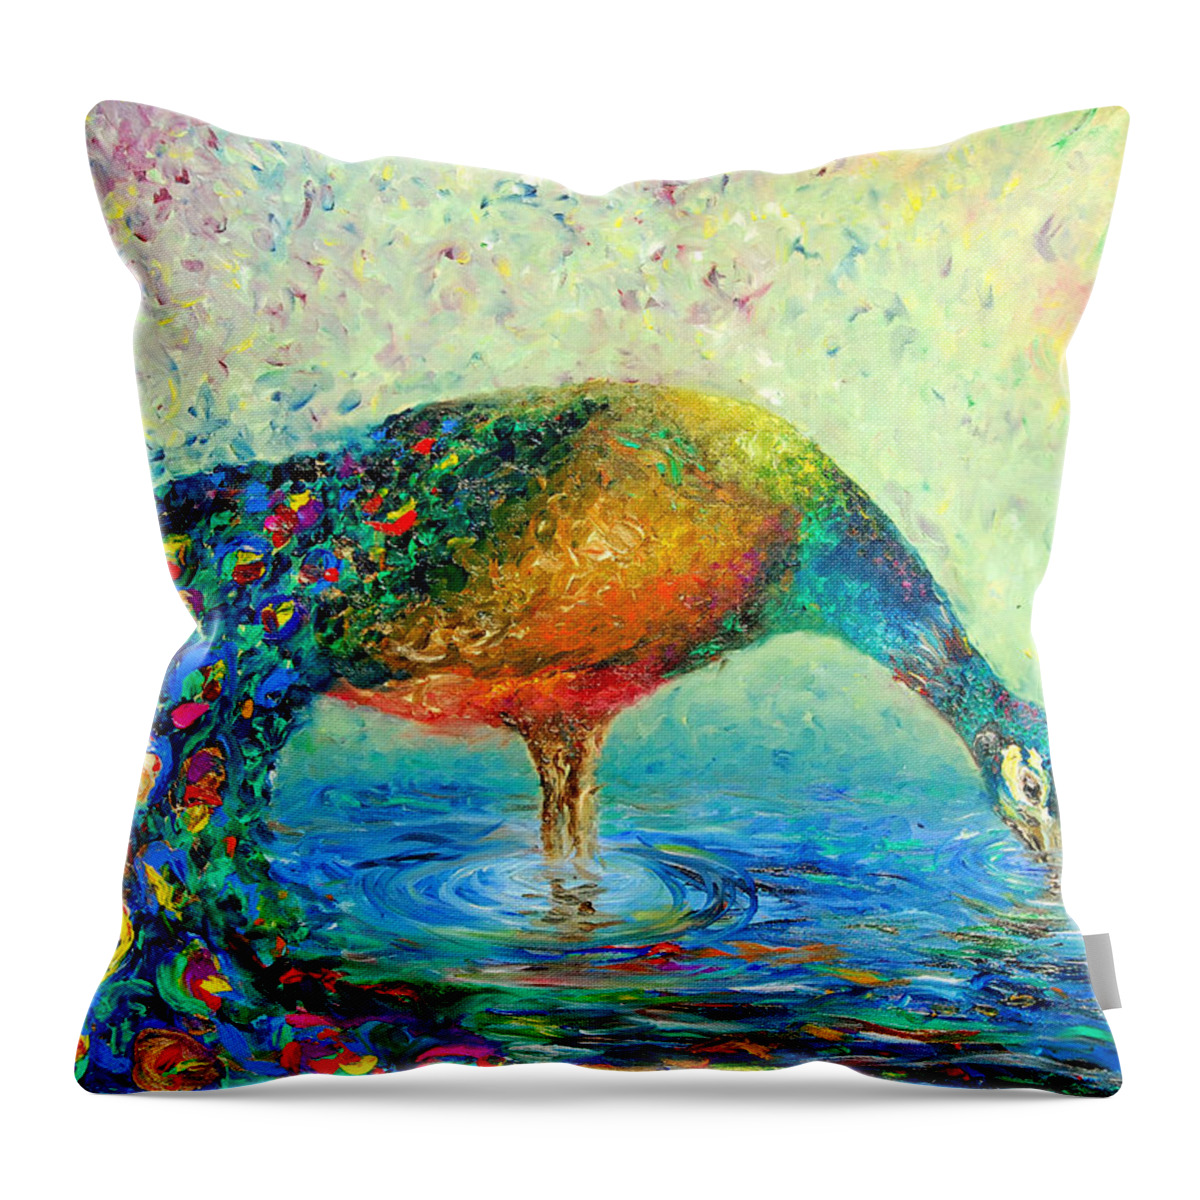 Pond Throw Pillow featuring the painting Pause by Hafsa Idrees